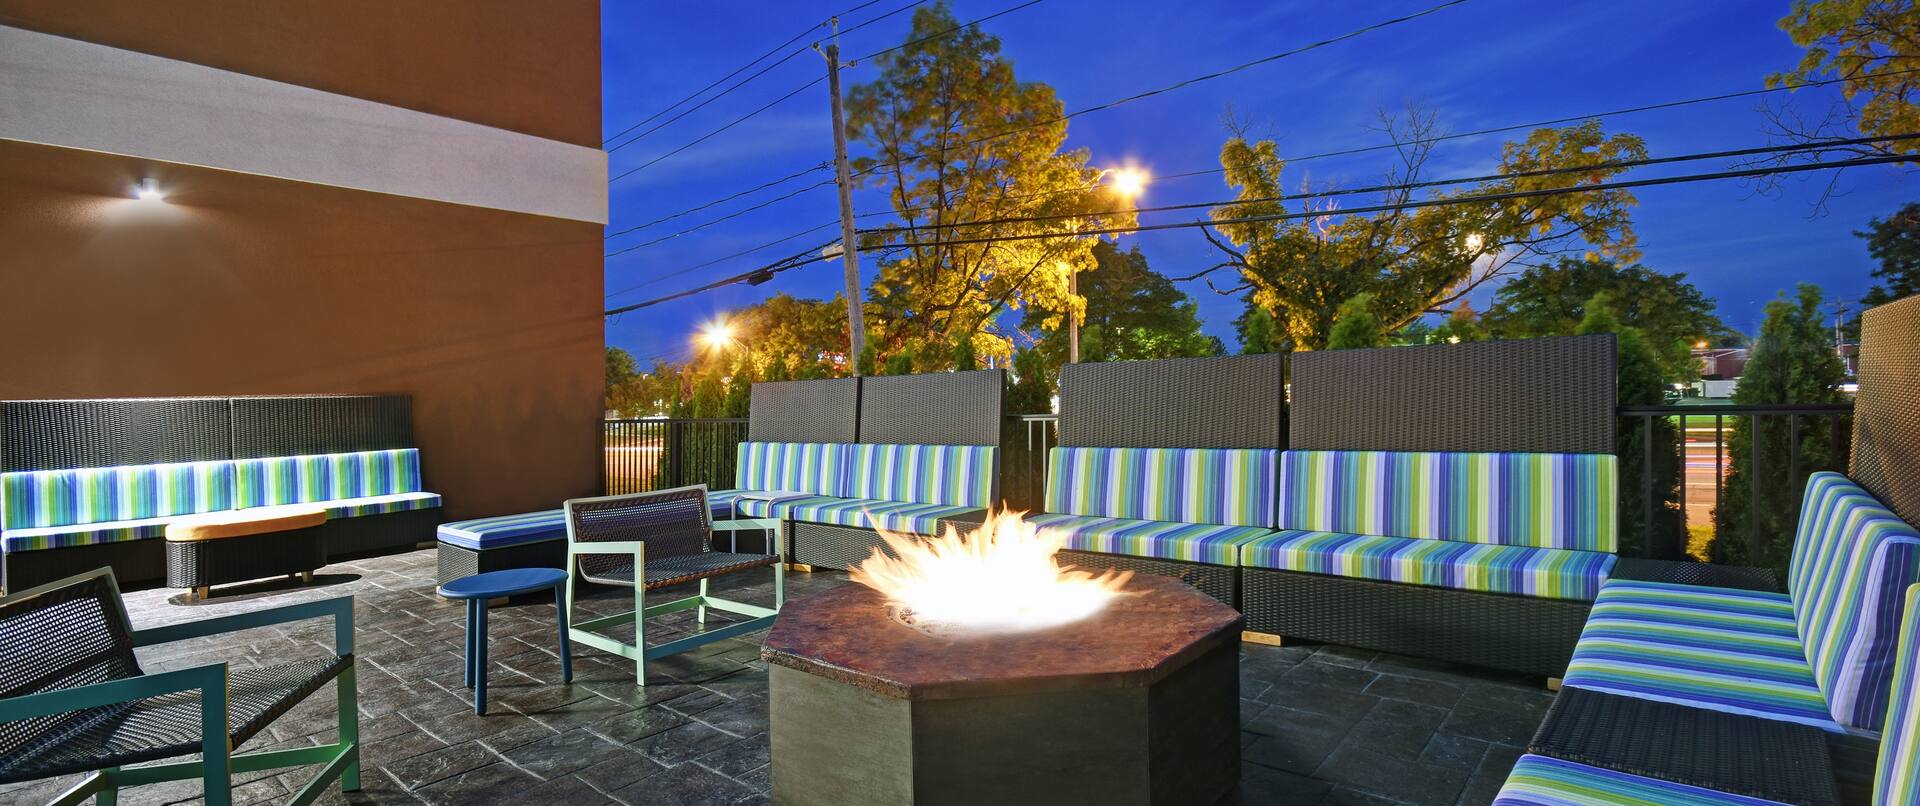 Outdoor Patio Seating Area with Firepit